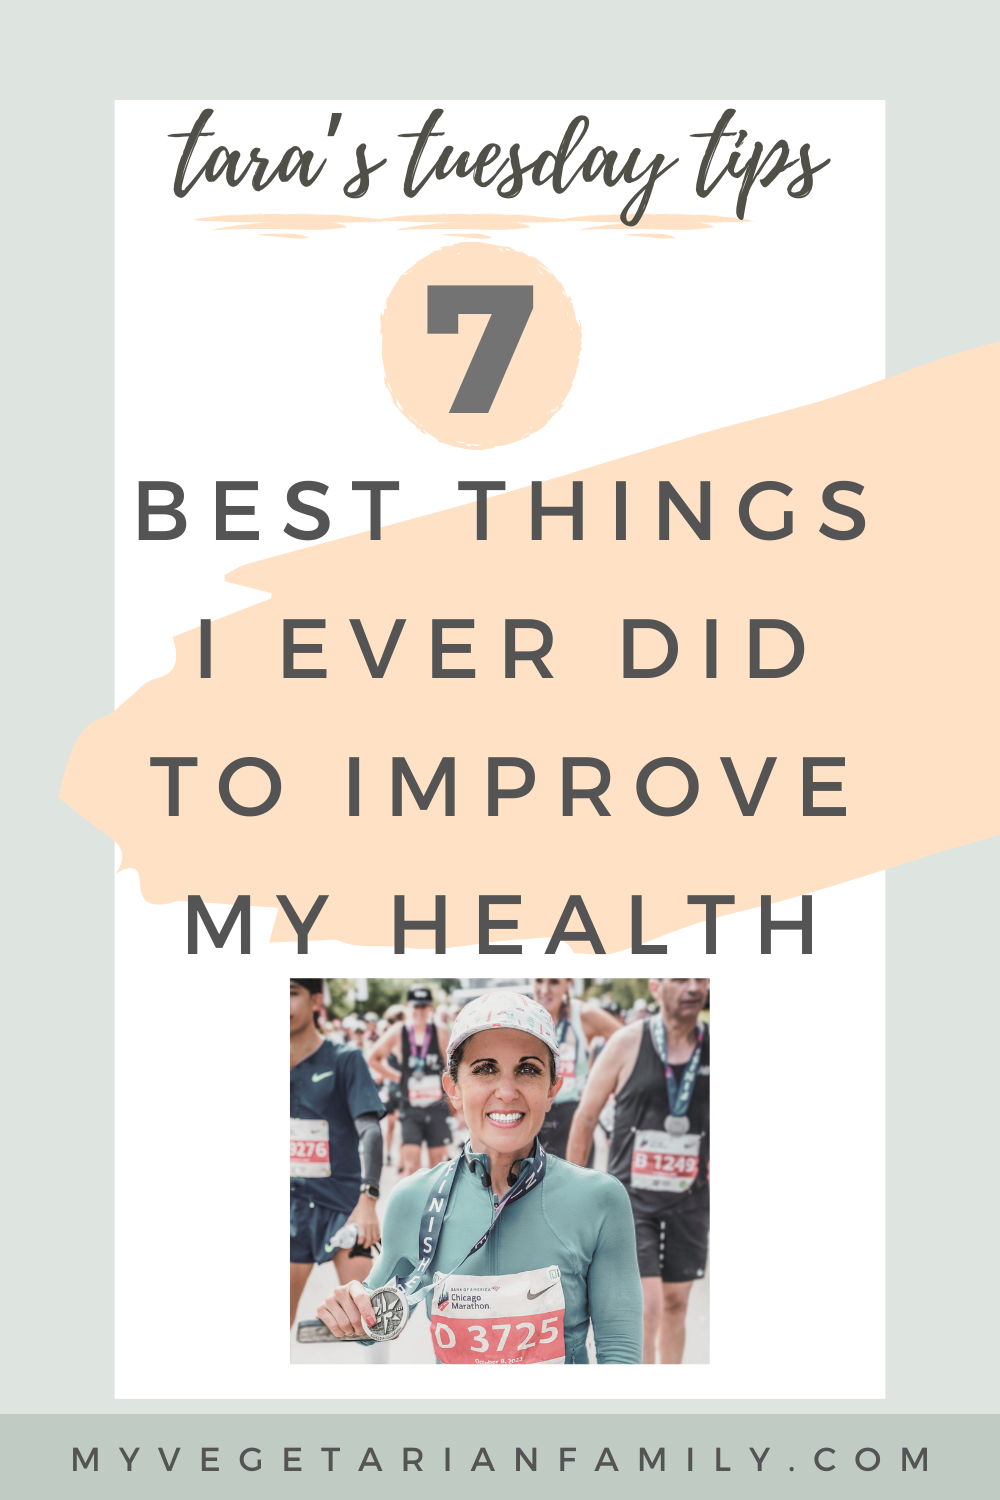 7 Best Things I Ever Did to Improve My Health | Tara's Tuesday Tips | My Vegetarian Family #improveyourhealth